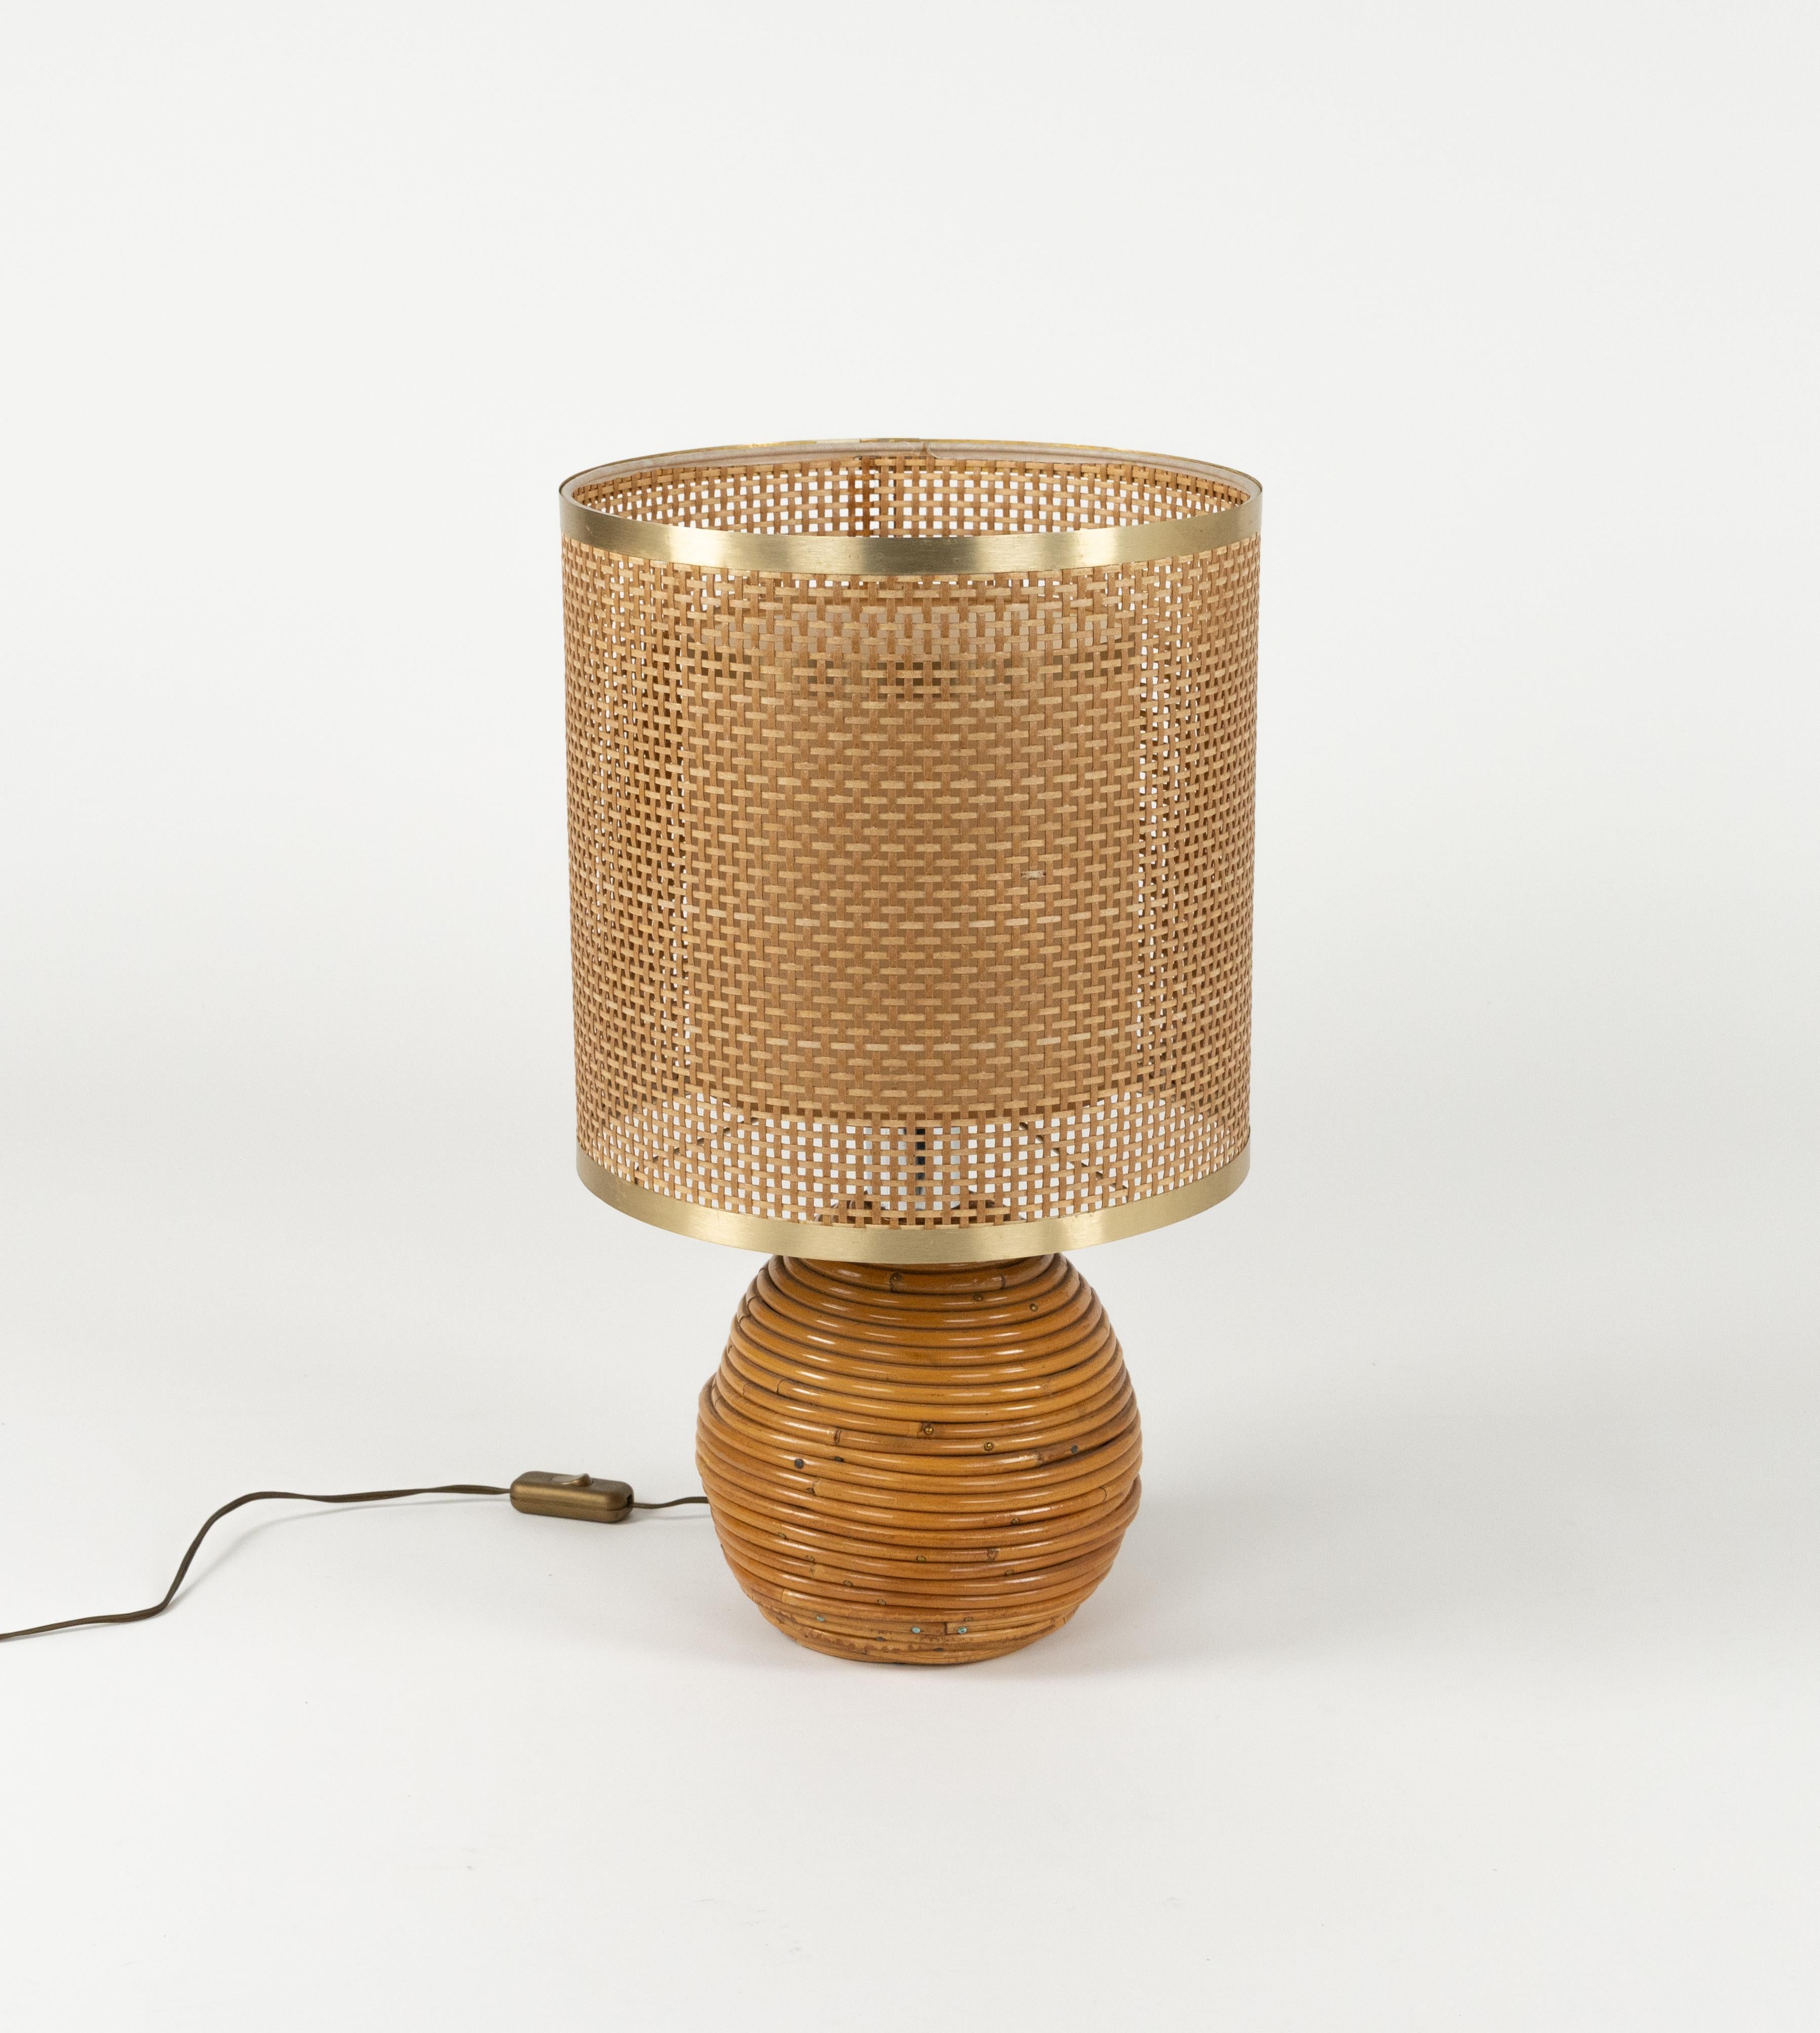 Mid-Century Modern Midcentury Rattan, Wicker and Chrome Table Lamp by Vivai Del Sud, Italy 1970s